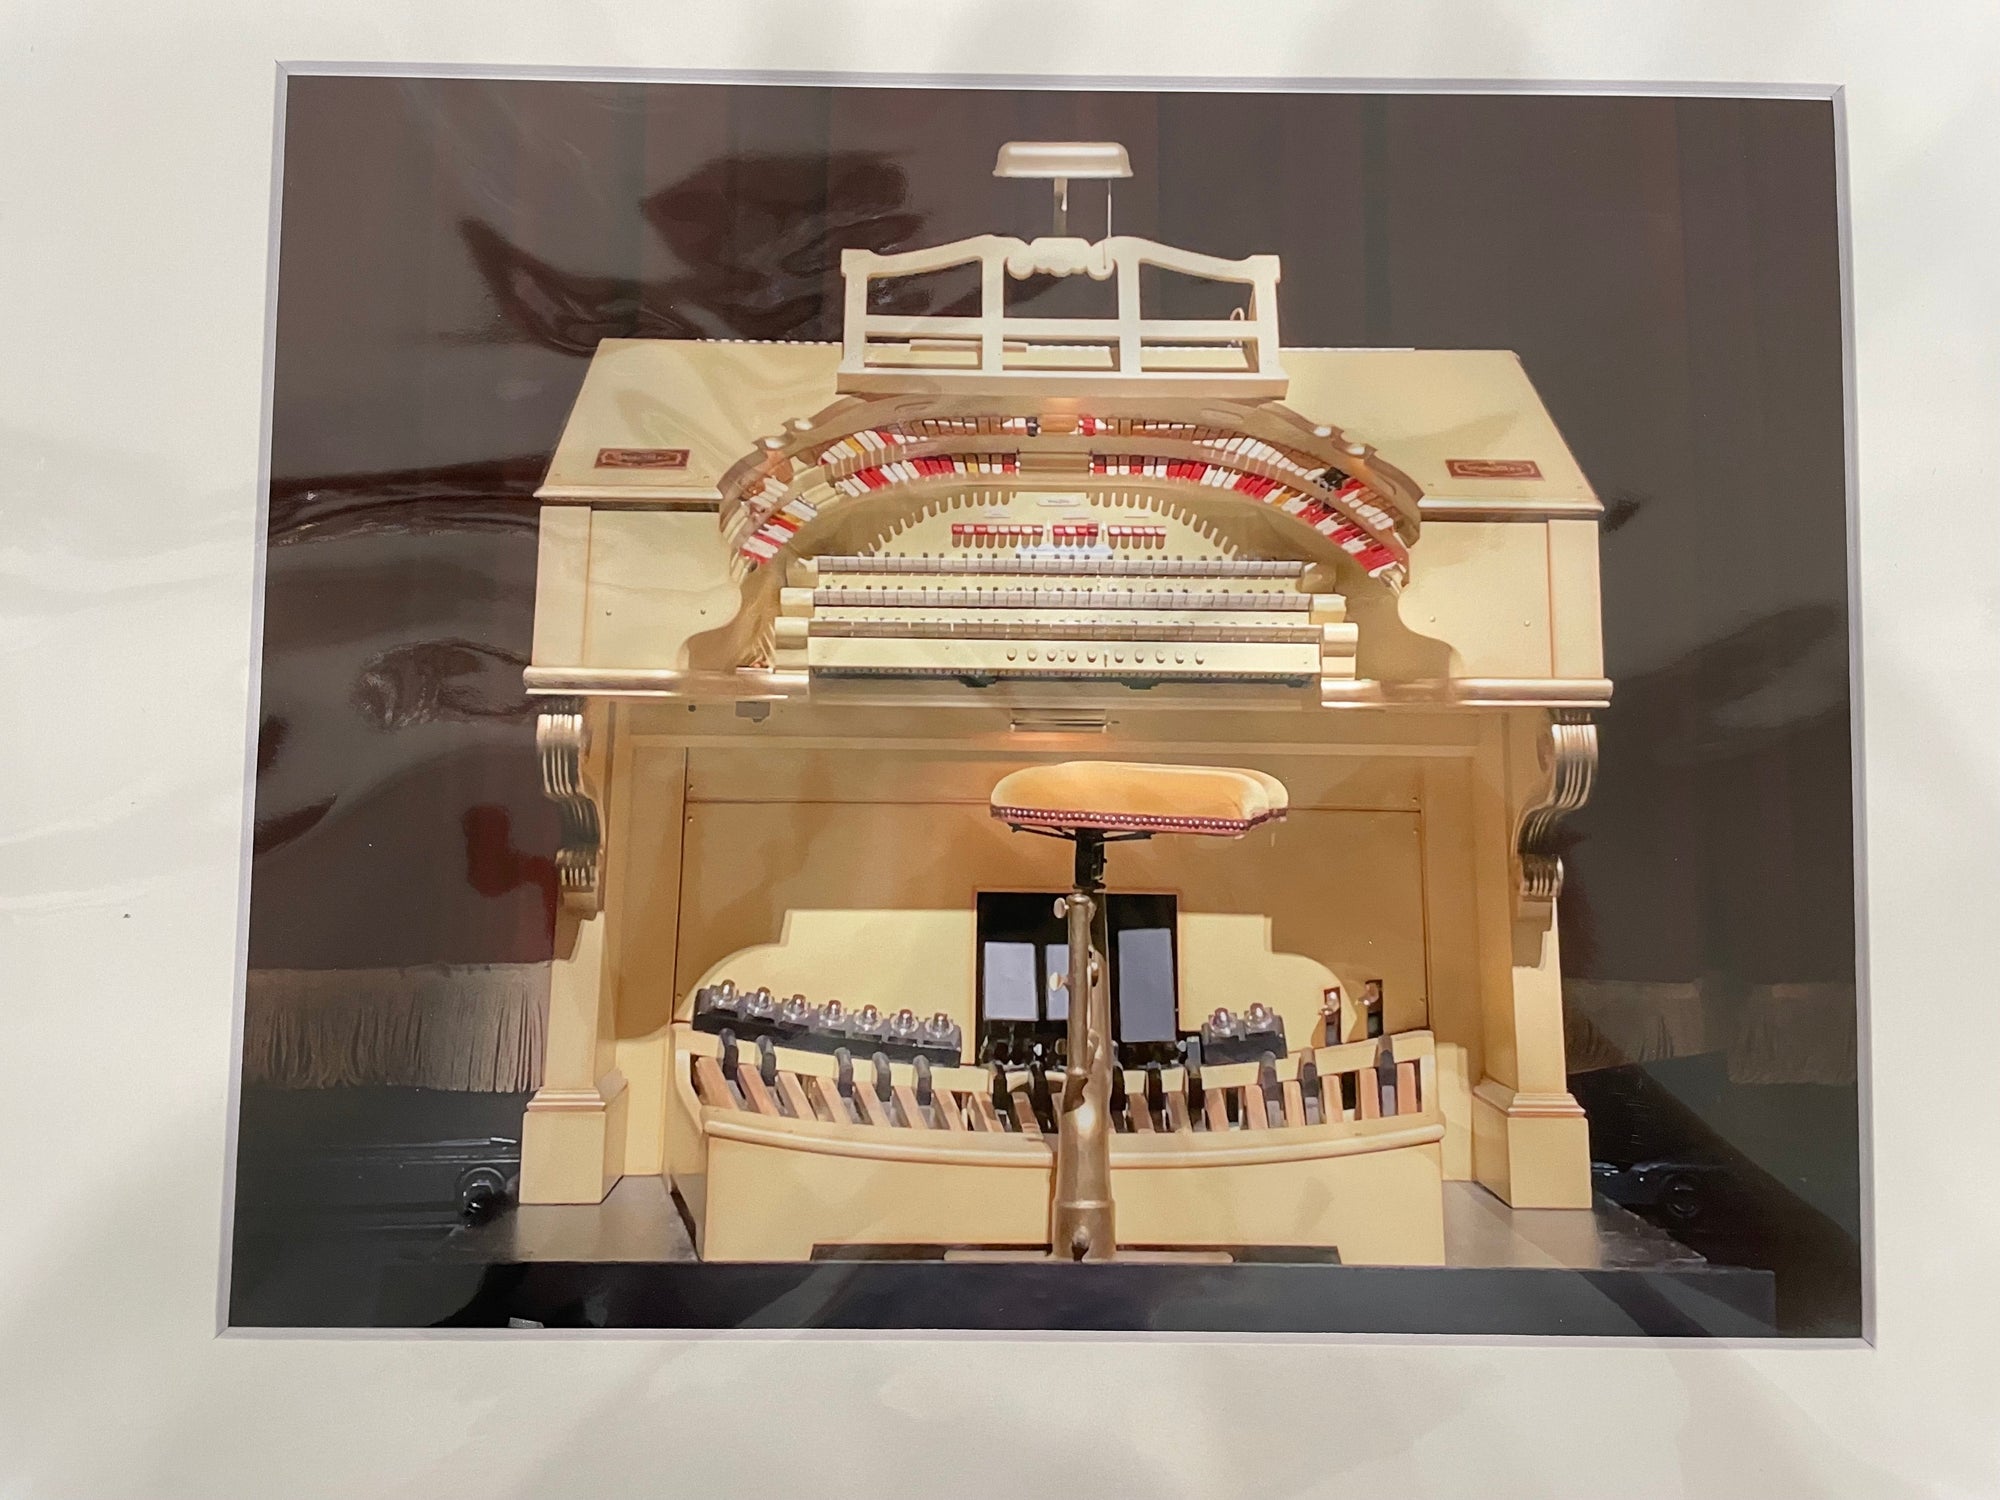 154 'The Mighty Wurlitzer Organ at the Orpheum Theatre'-Photograph by Mike Baber